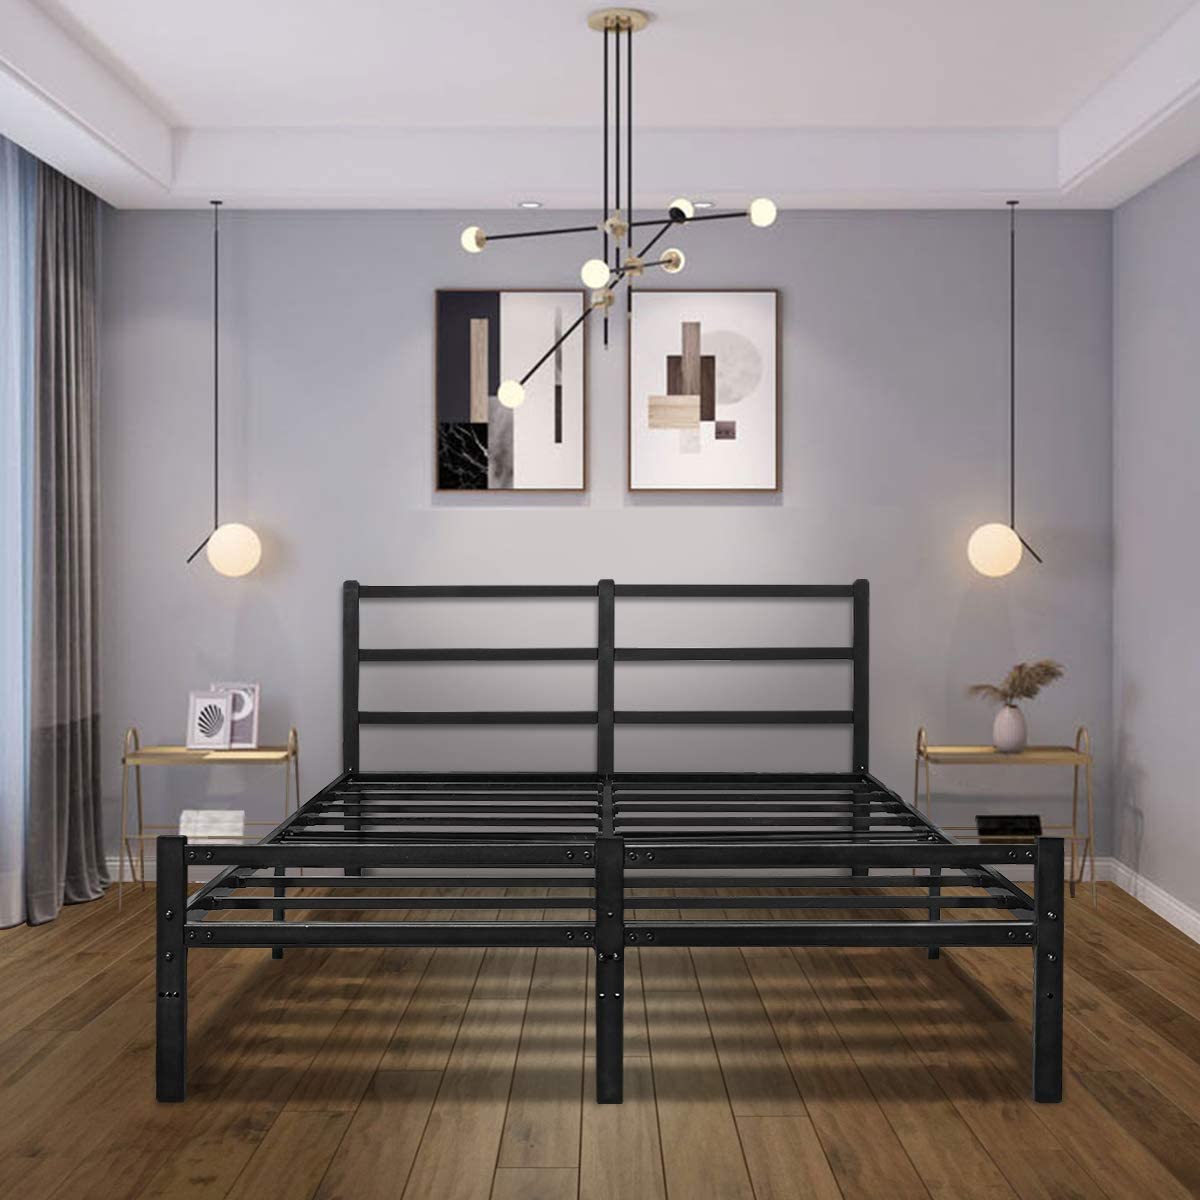 King King Size Bed Frame with Storage No Box Spring Needed Metal Heavy Duty 14 Inch Black Platform Bedframe